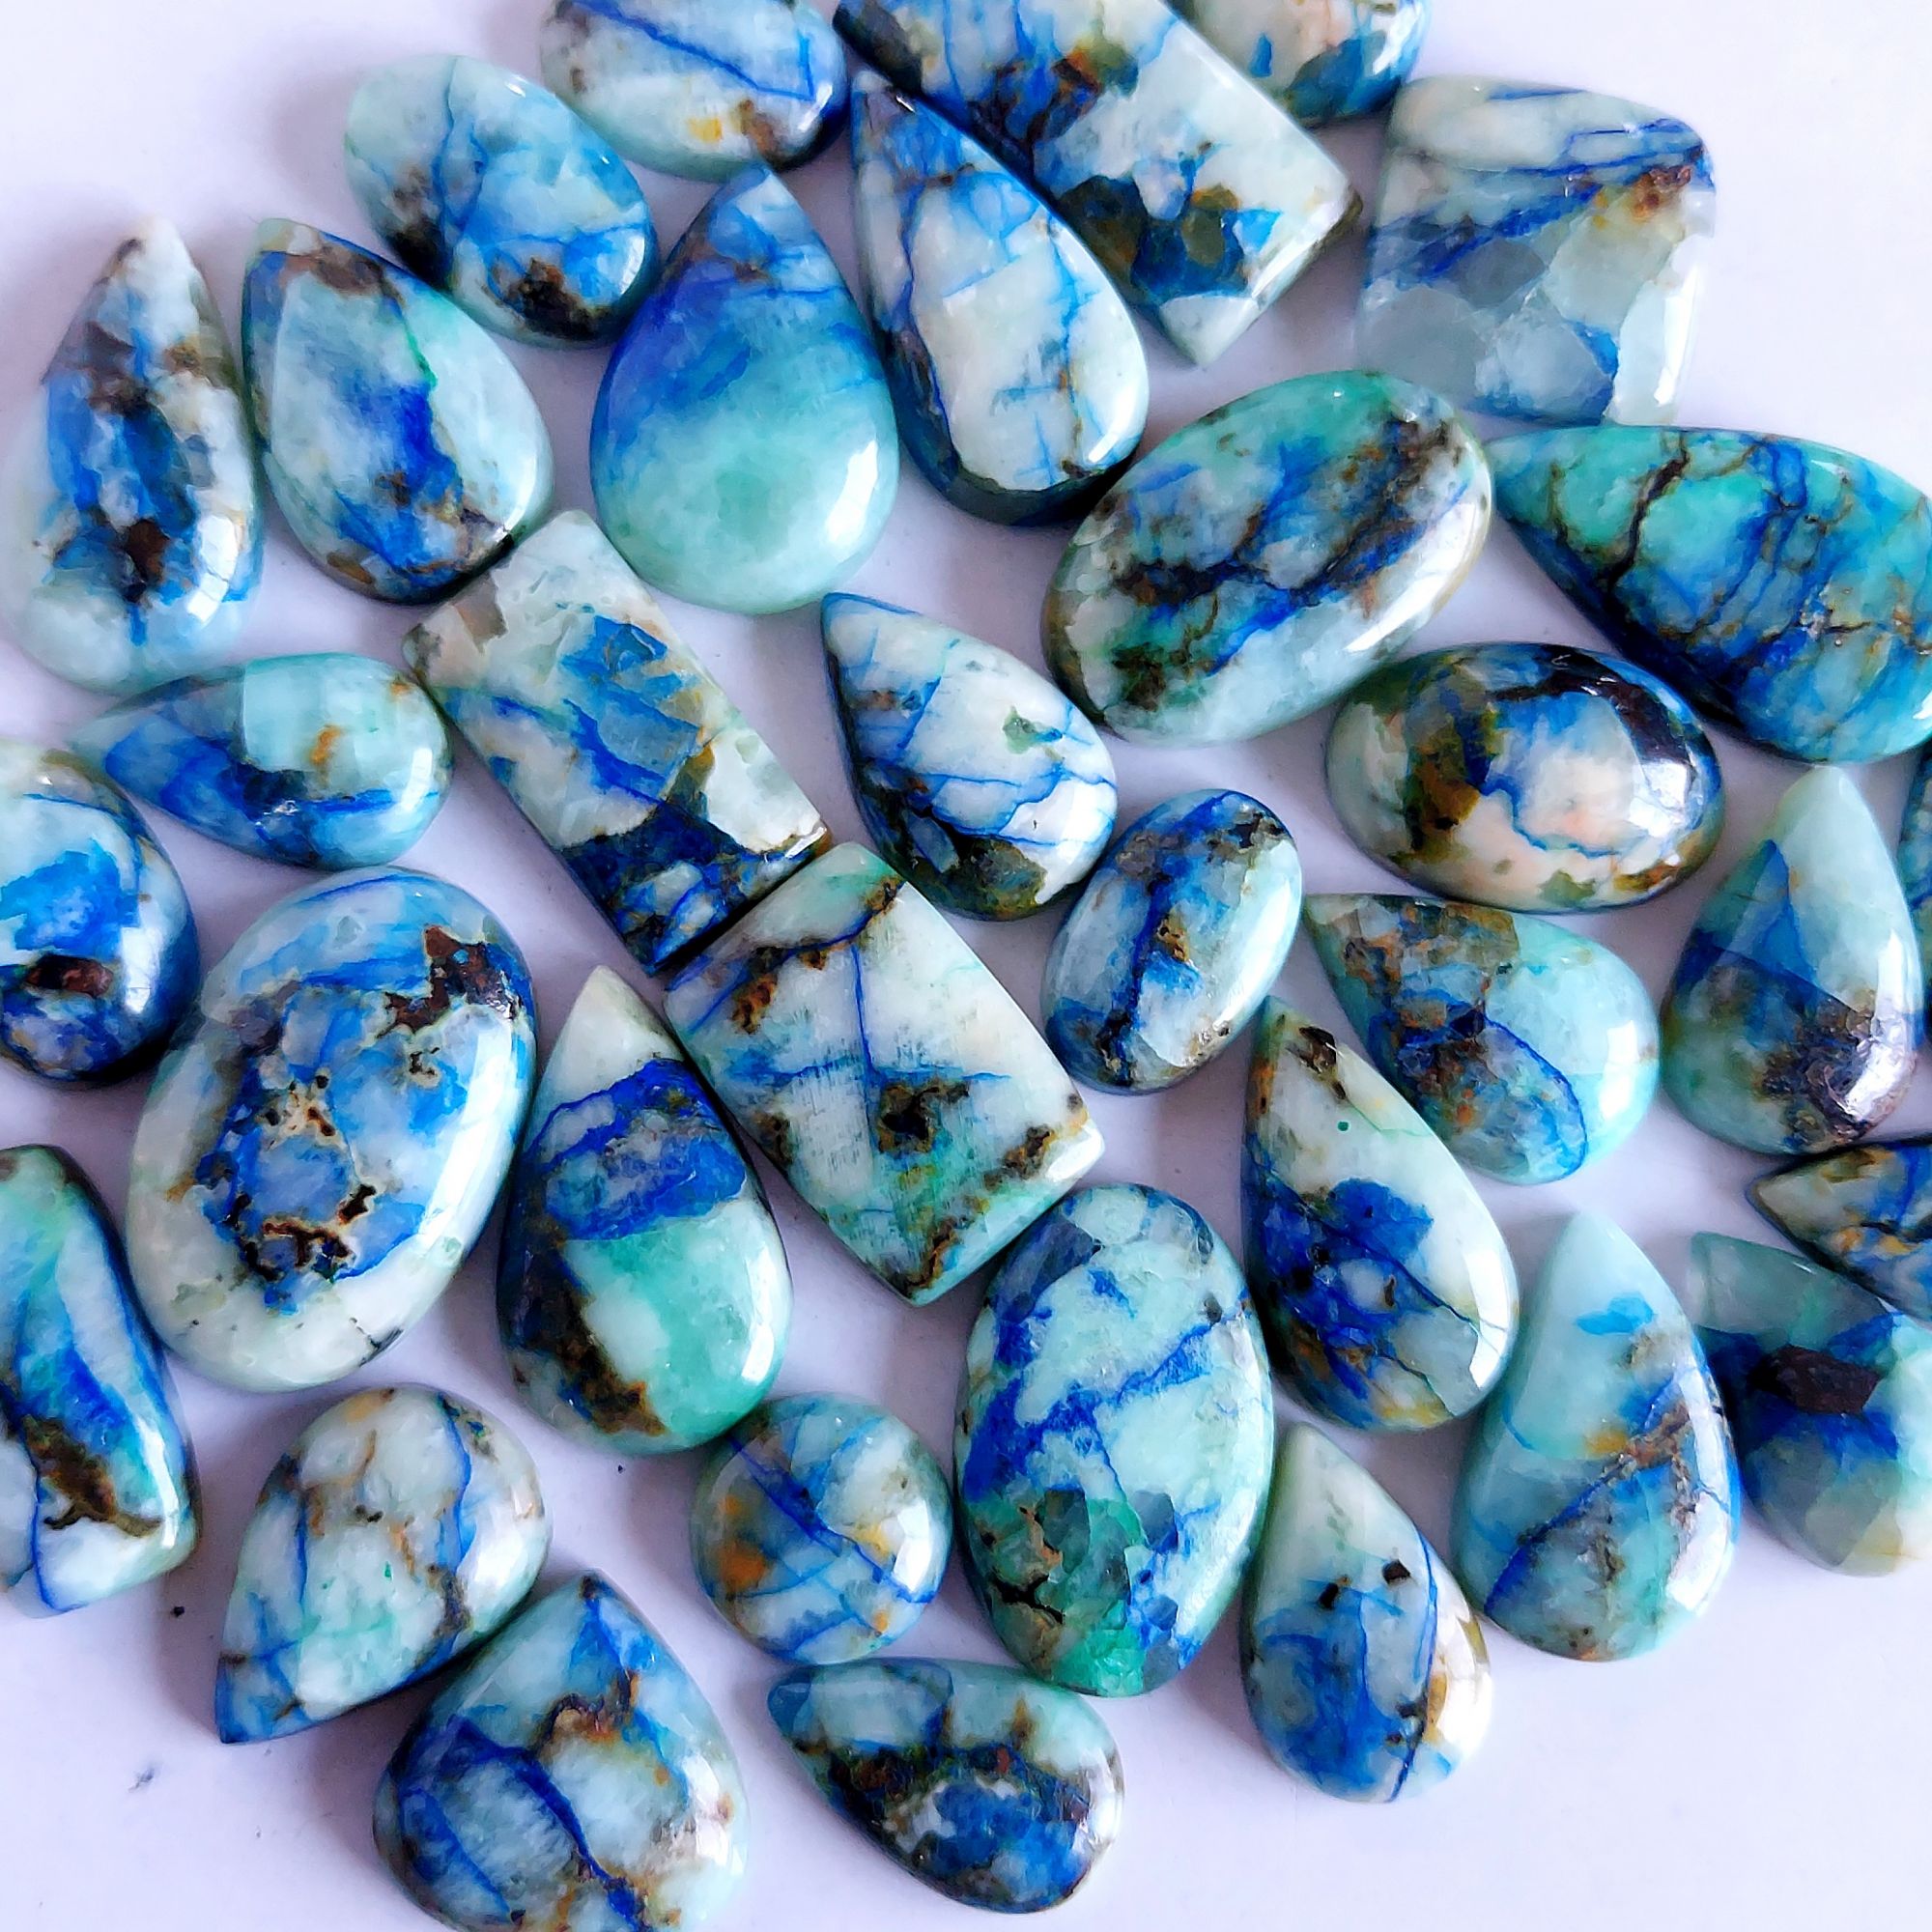 417.Cts 34 Pcs Natural Smooth Azurite Mix Loose Gemstone Cabochon Lot Size 26x12 13x13mm Wholesale Gemstone For jewelry